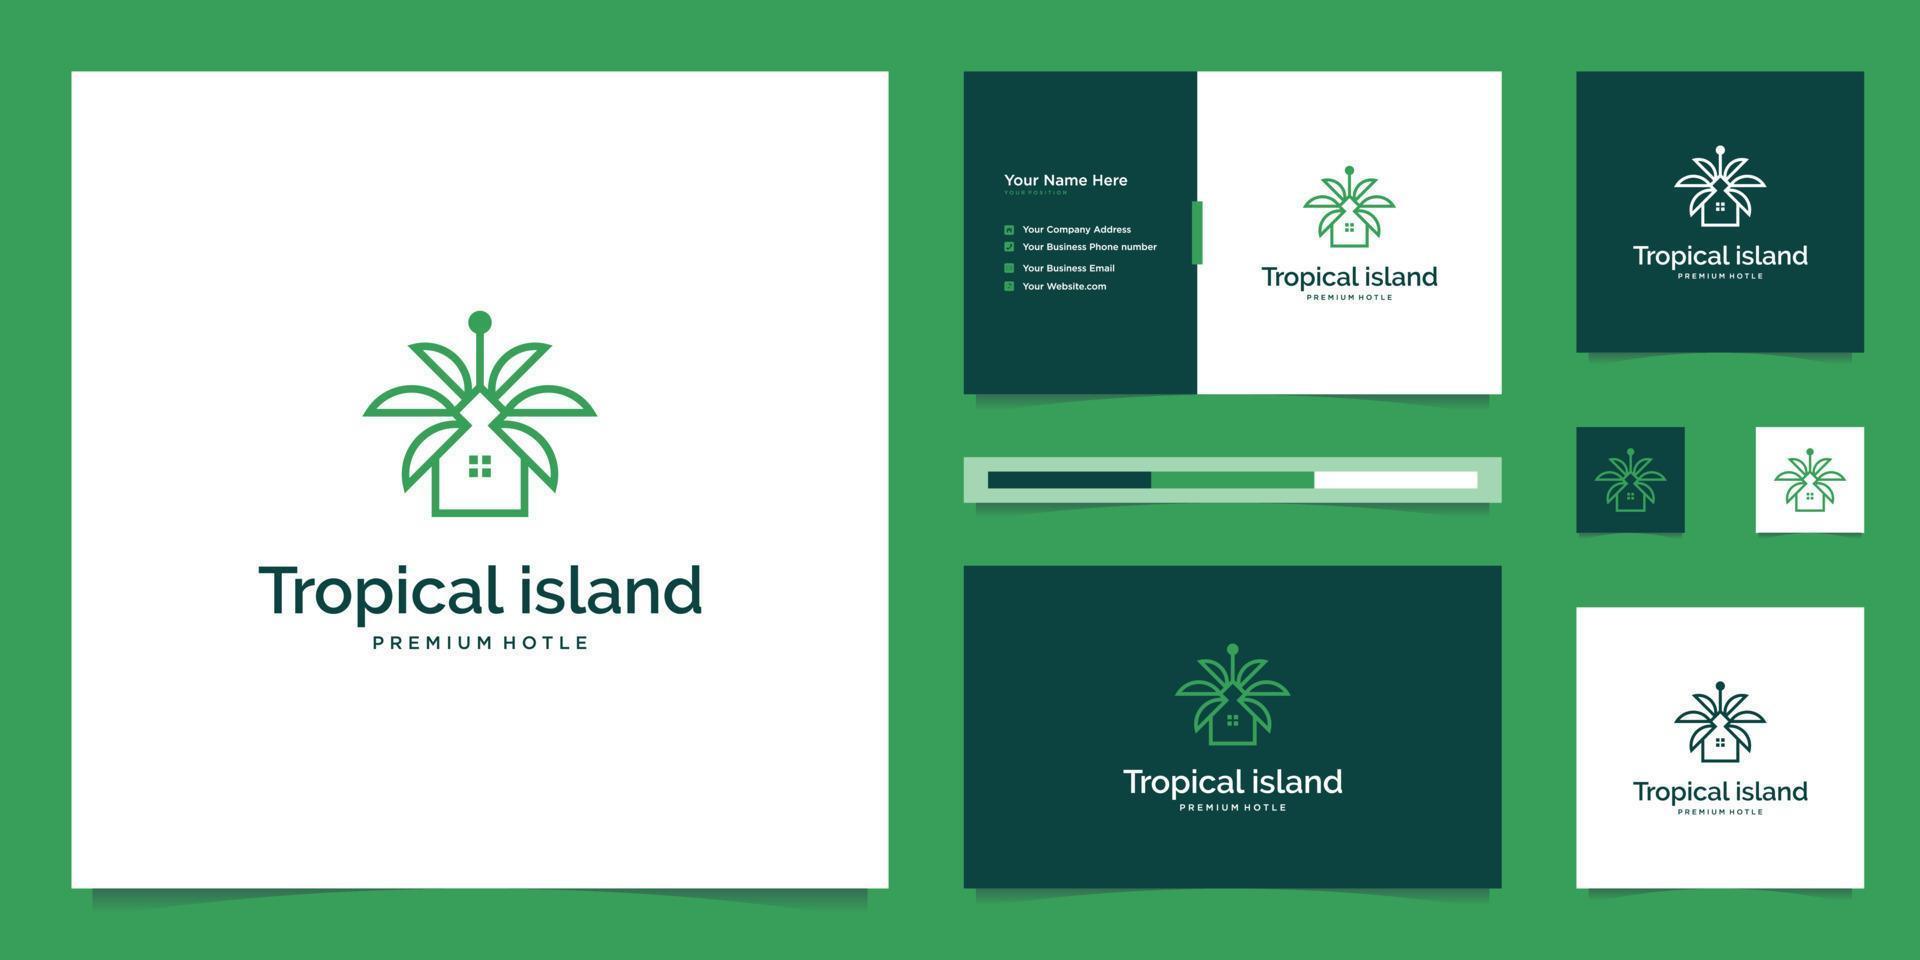 Palm tree and house. Abstract design concept for travel agencies, tropical resorts, beach hotels. Summer vacation symbol. Vector logo design template.